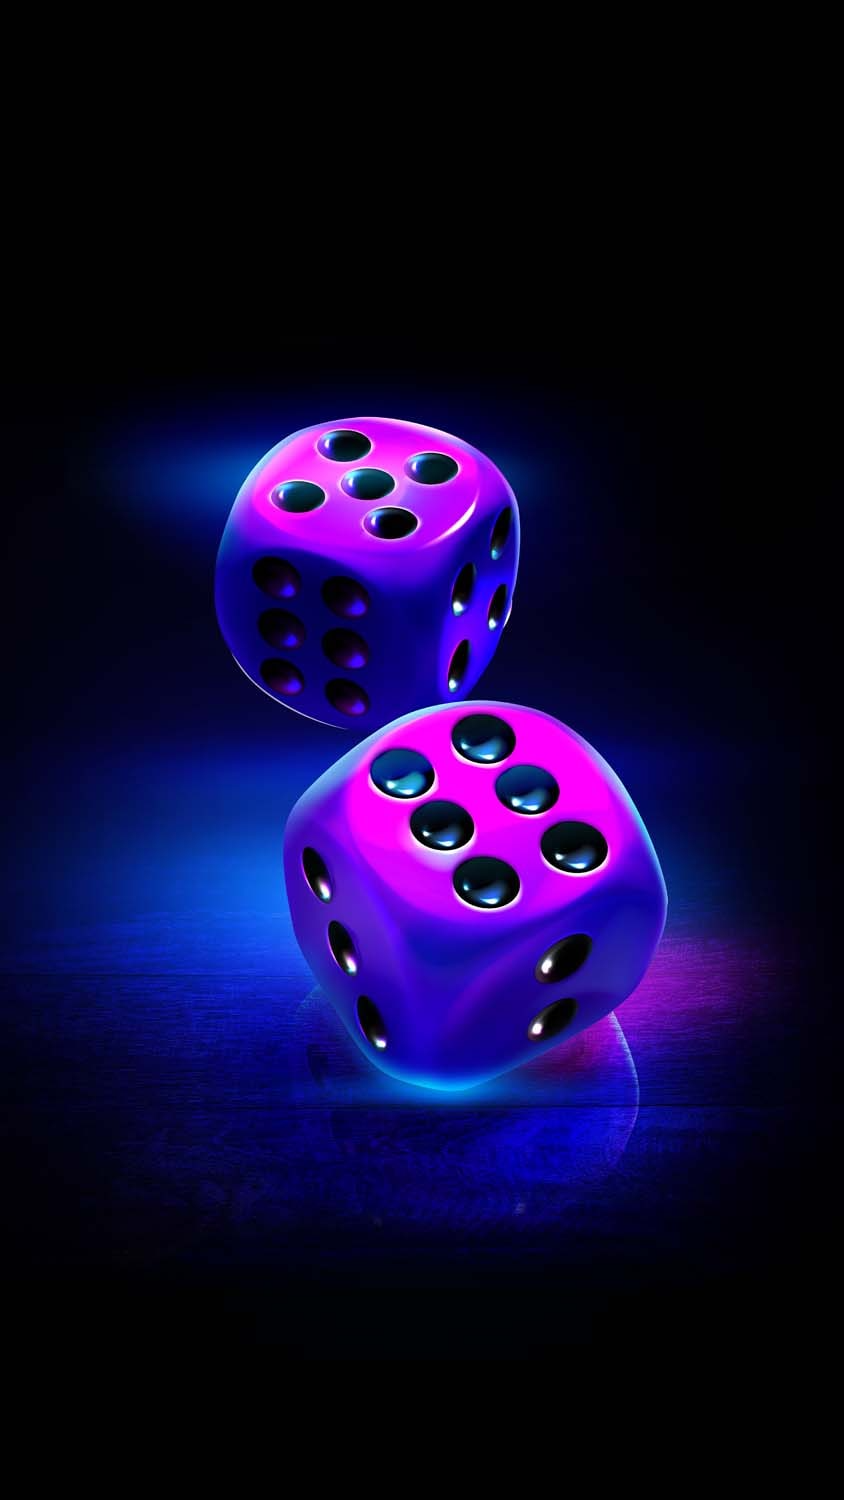 Abstract Dice Wallpaper by Mythic3D